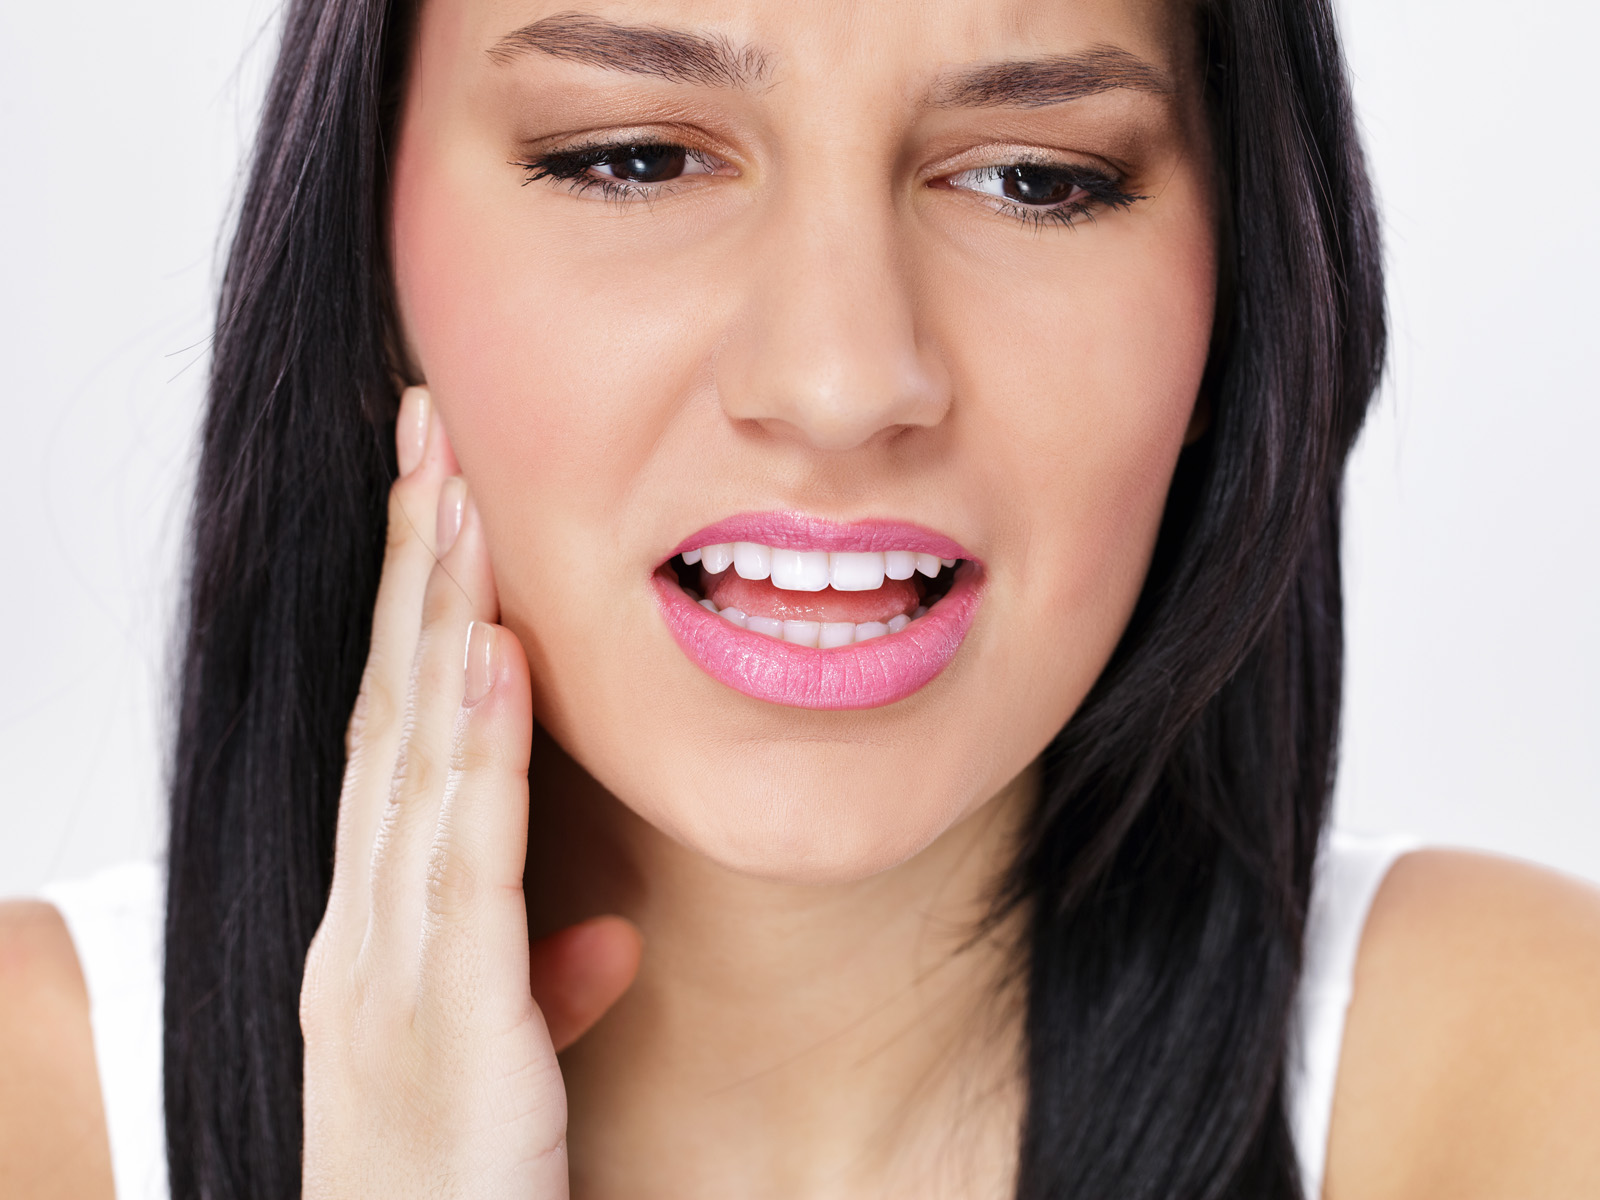 What are the first signs of wisdom teeth?